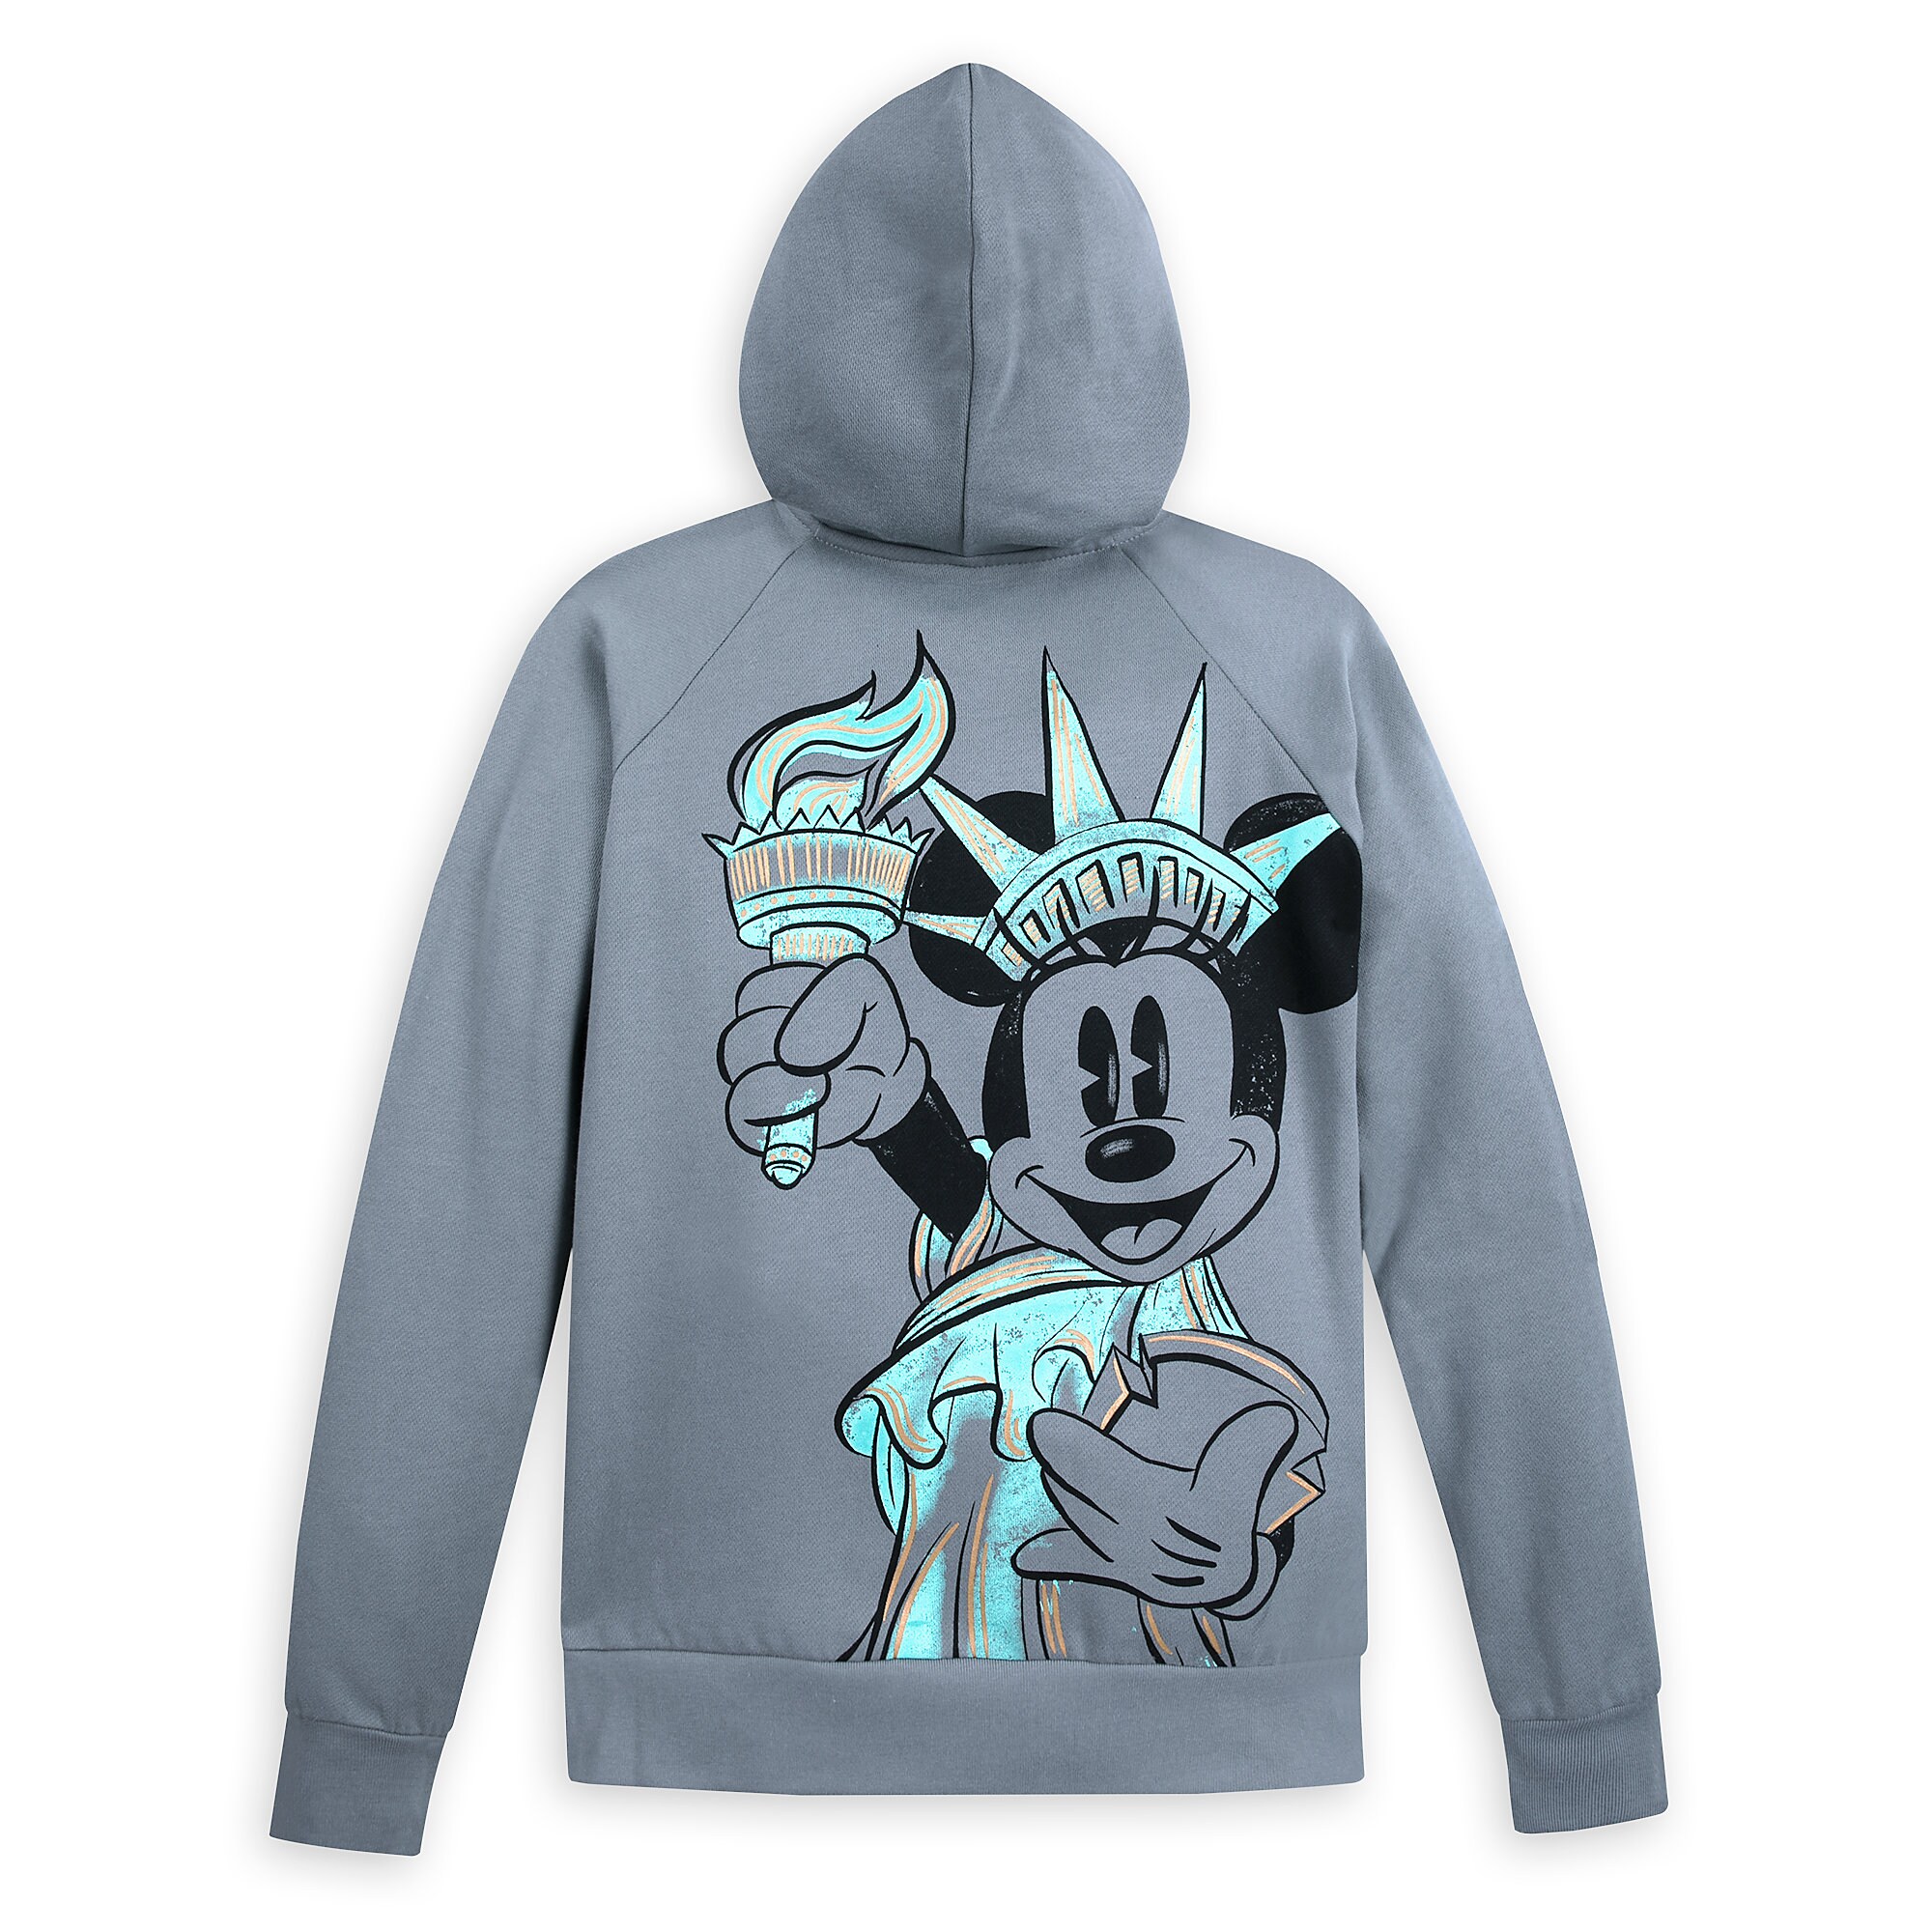 Minnie Mouse Statue of Liberty Hoodie for Women - New York City